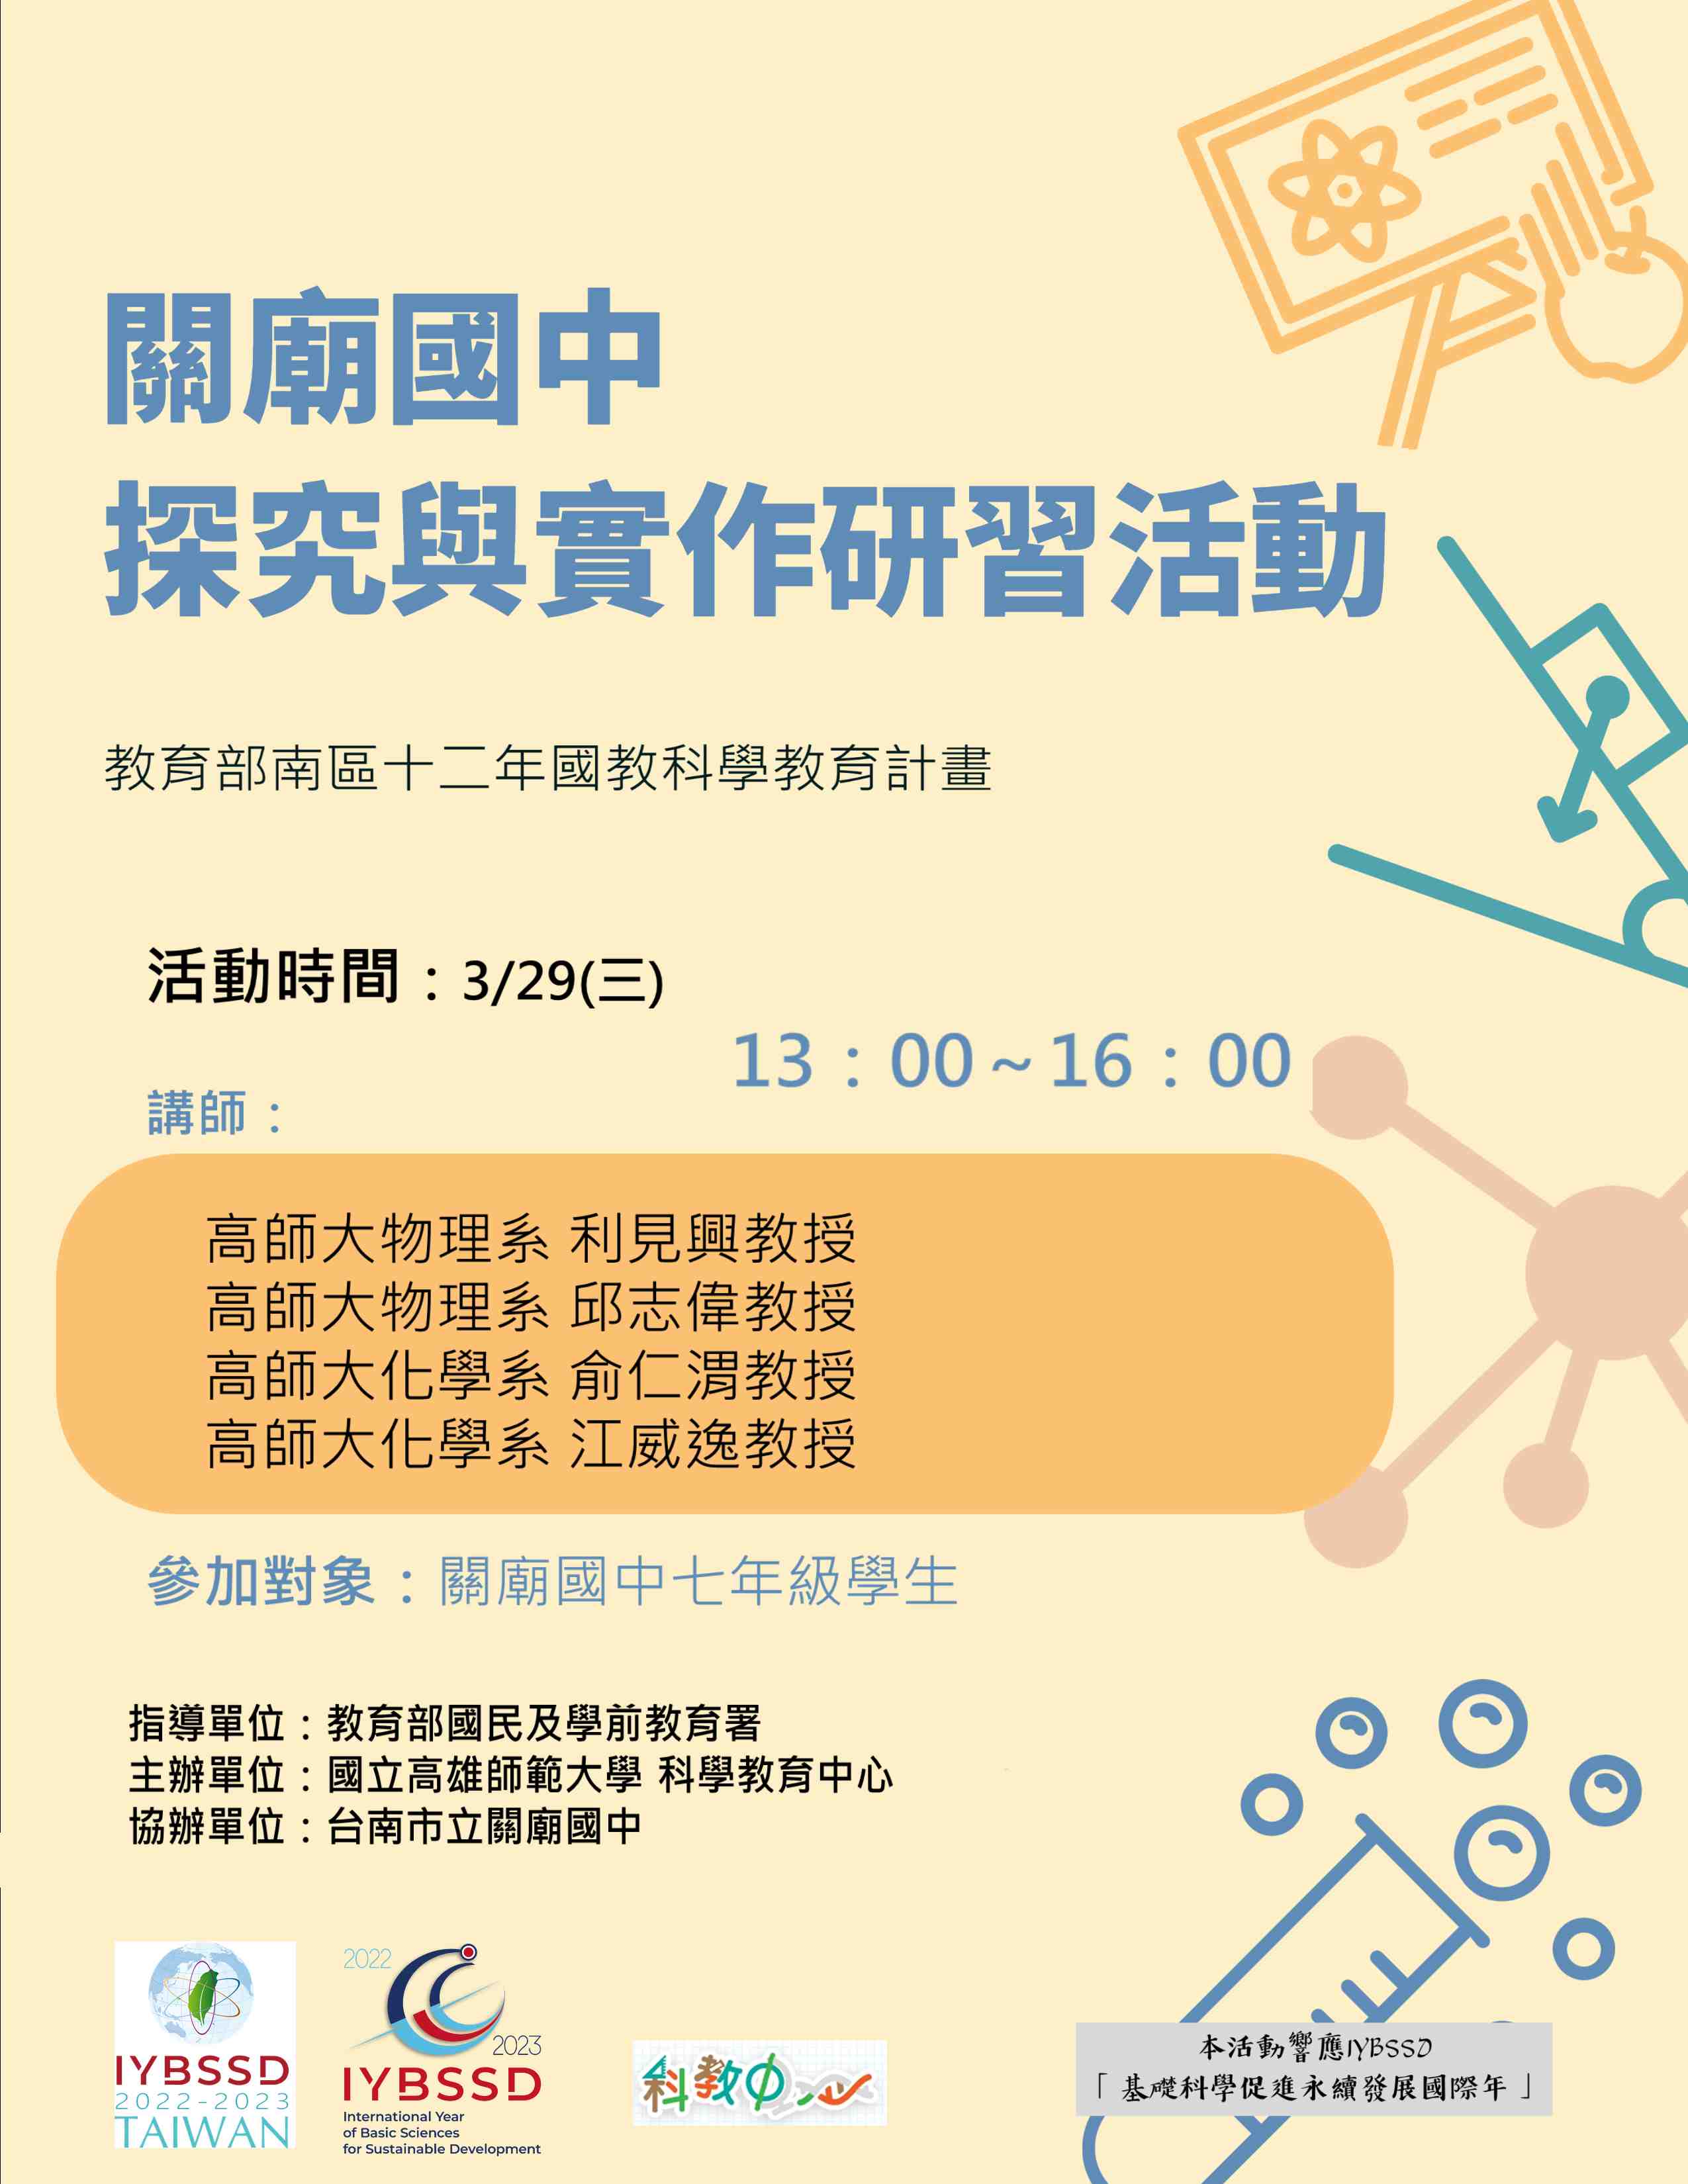 Exploration and hands-on workshop activities at Gushan Elementary School Promotional Graphics or Posters